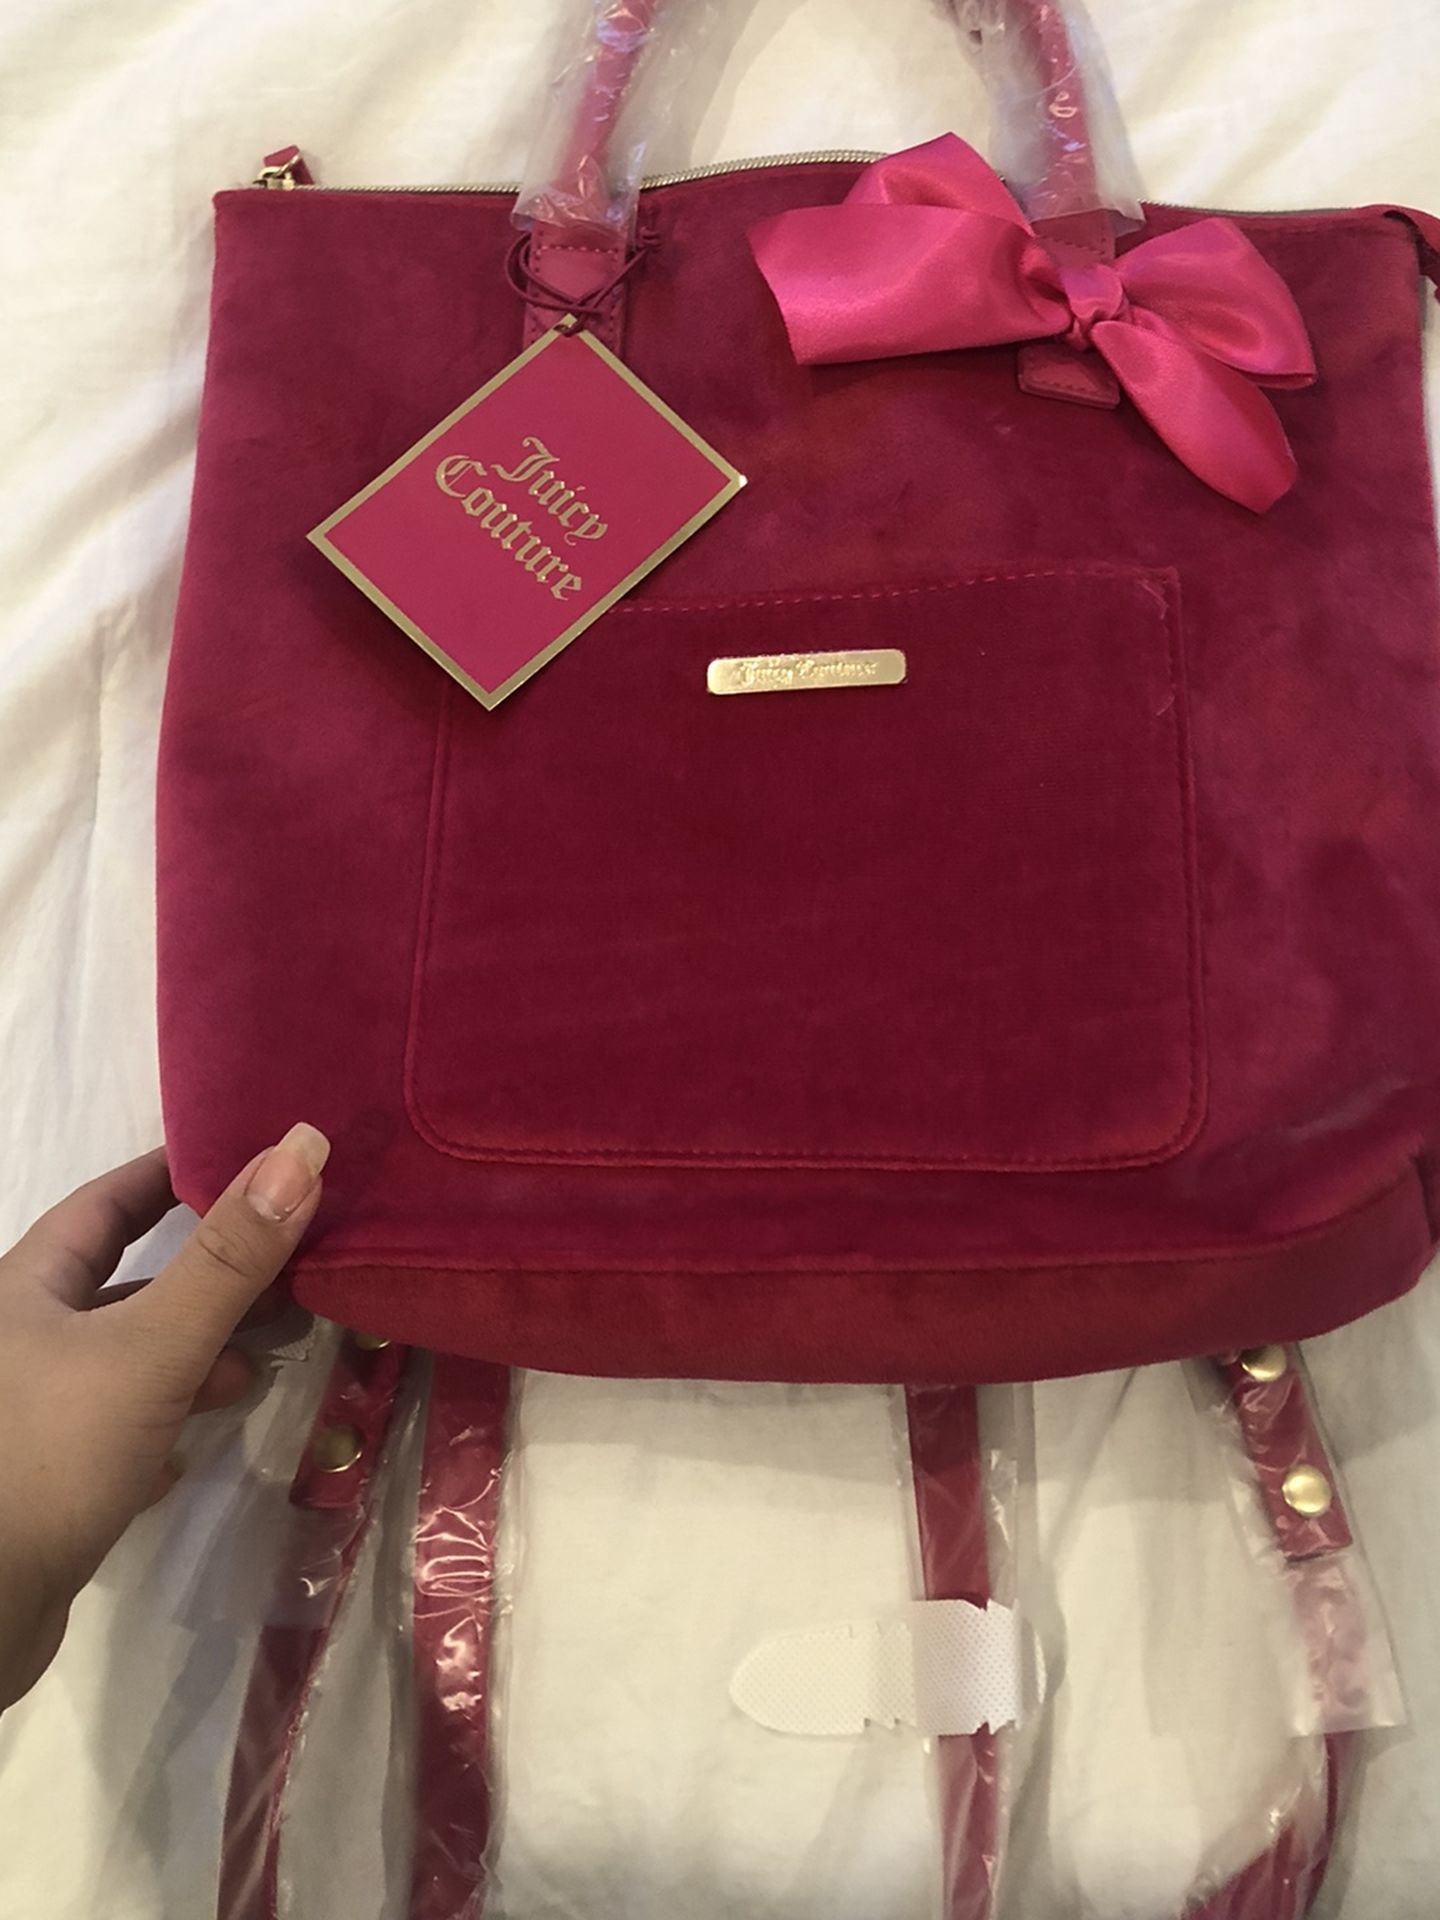 Juicy Couture, Pink Bag / Purse